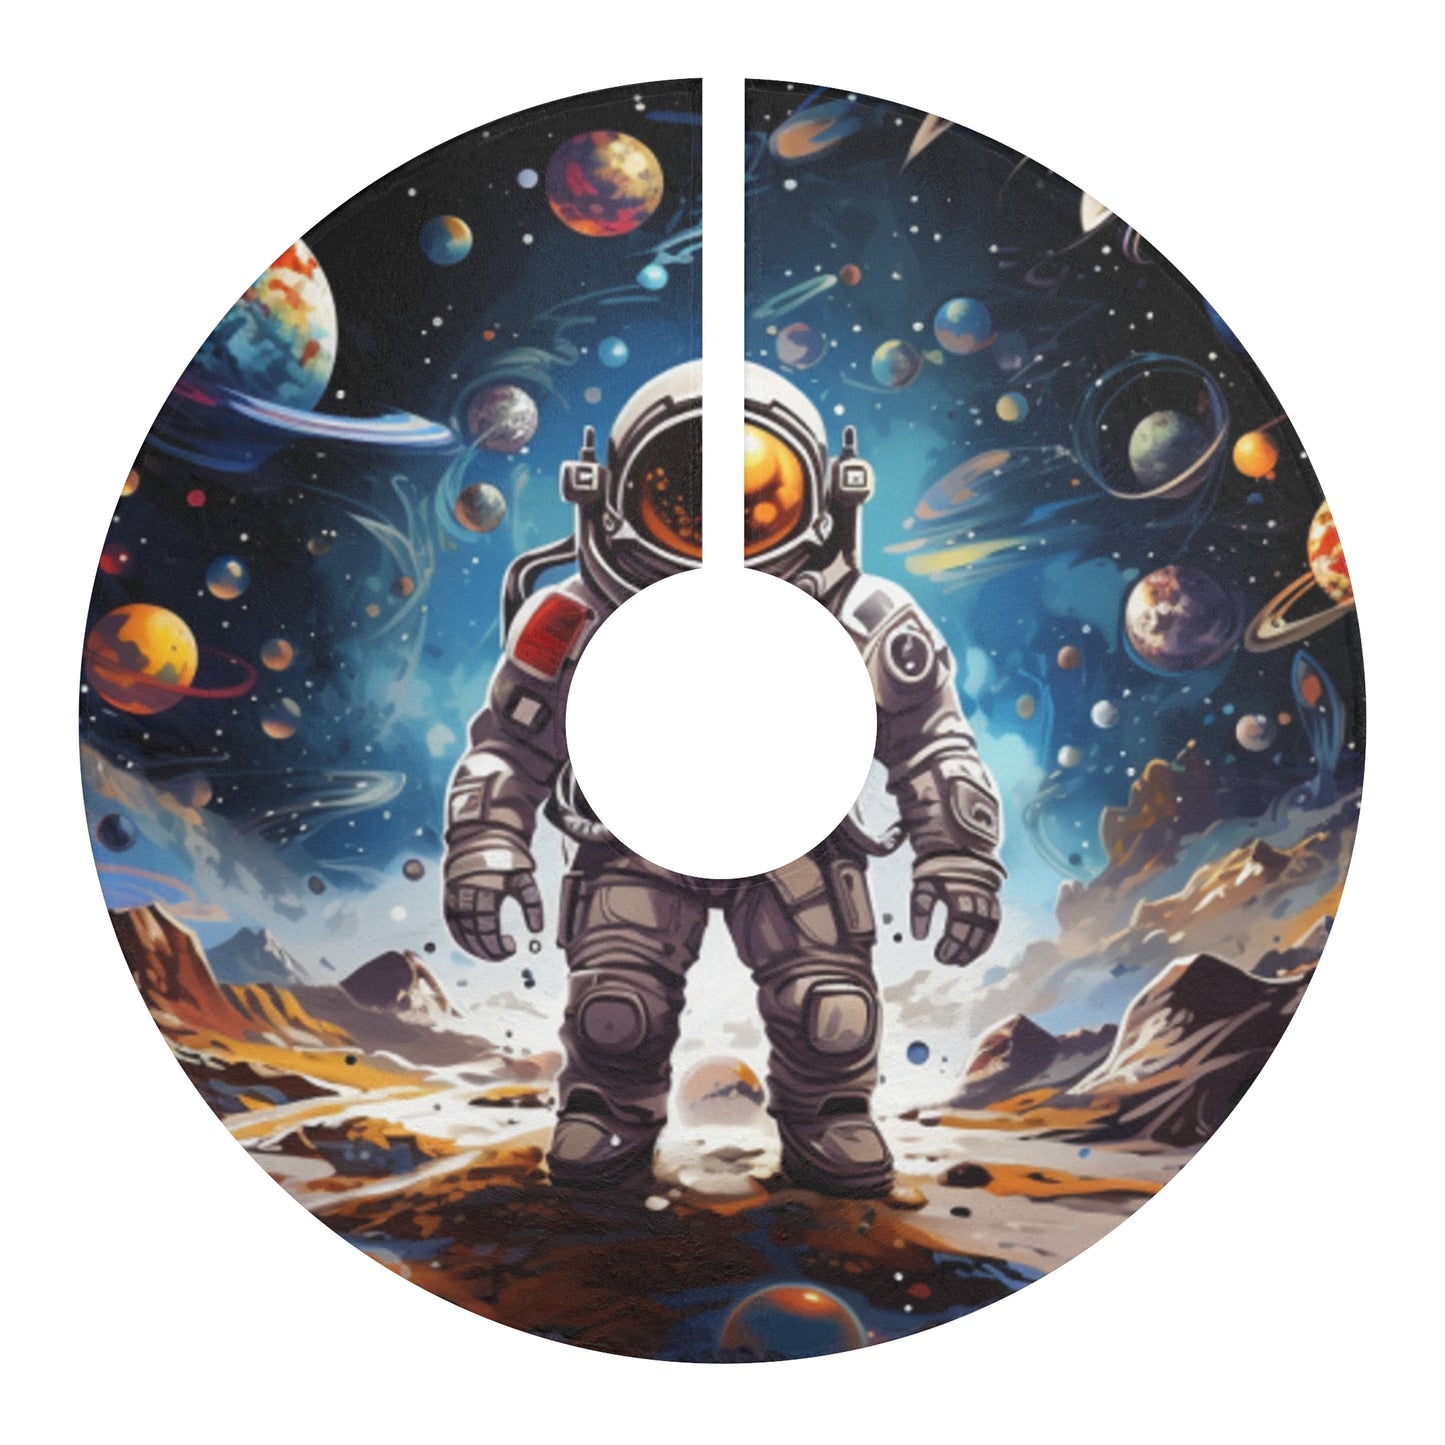 Galactic Voyage: Astronaut Journey in Celestial Star Cosmic Exploration - Christmas Tree Skirts